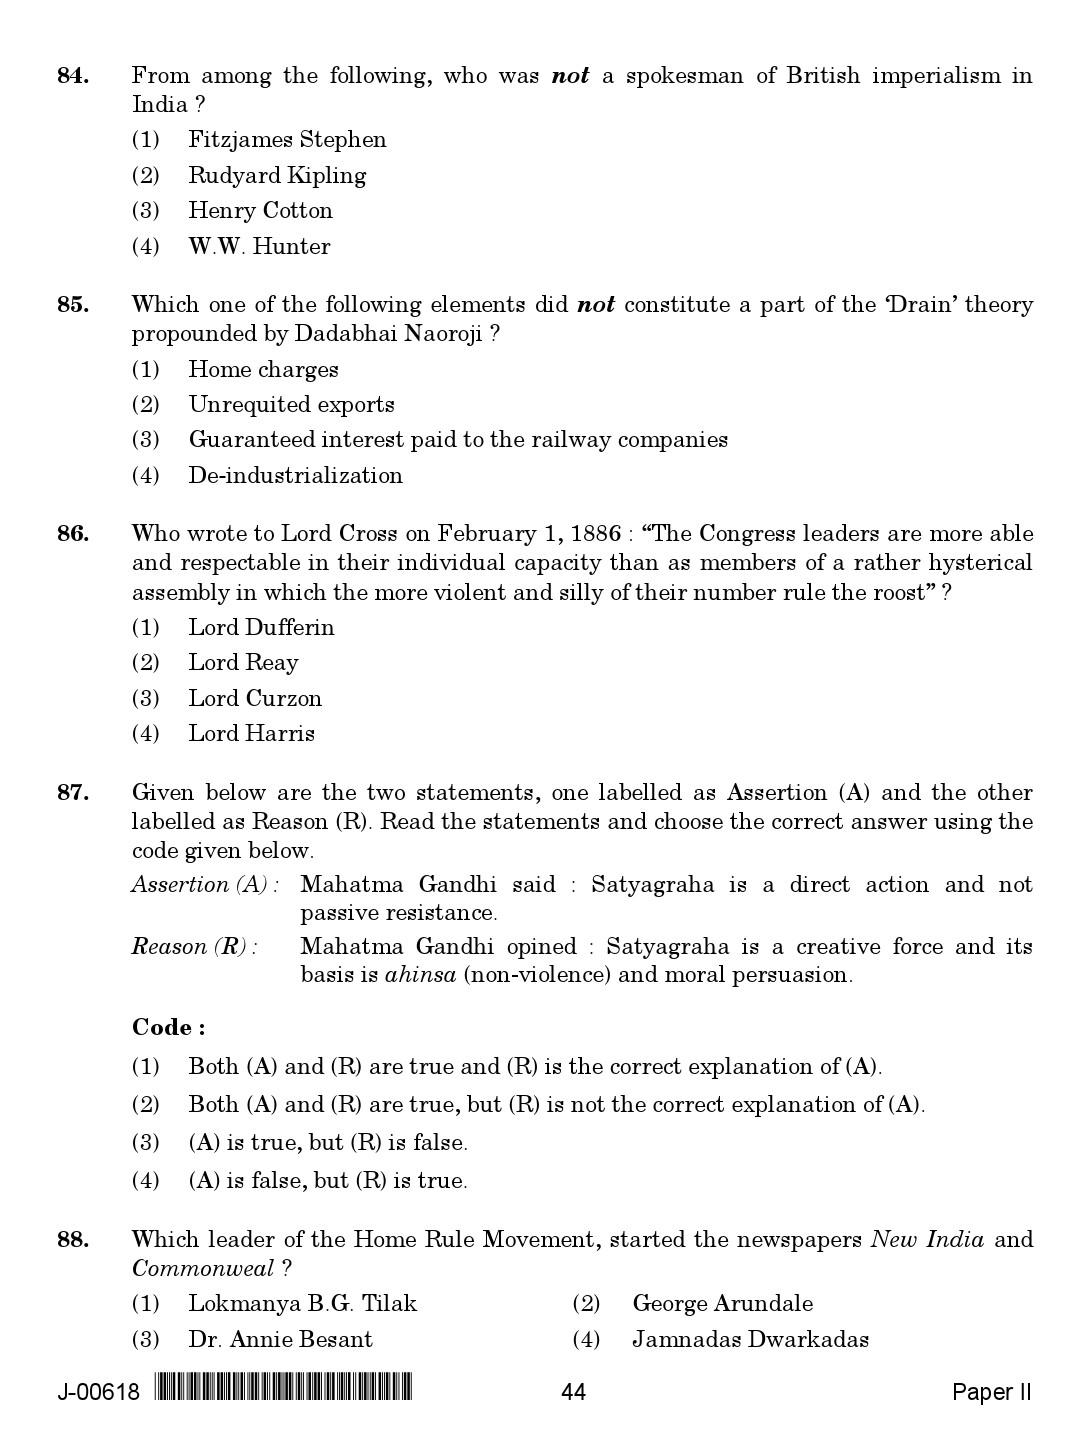 History Question Paper II July 2018 in English 2nd Exam 23